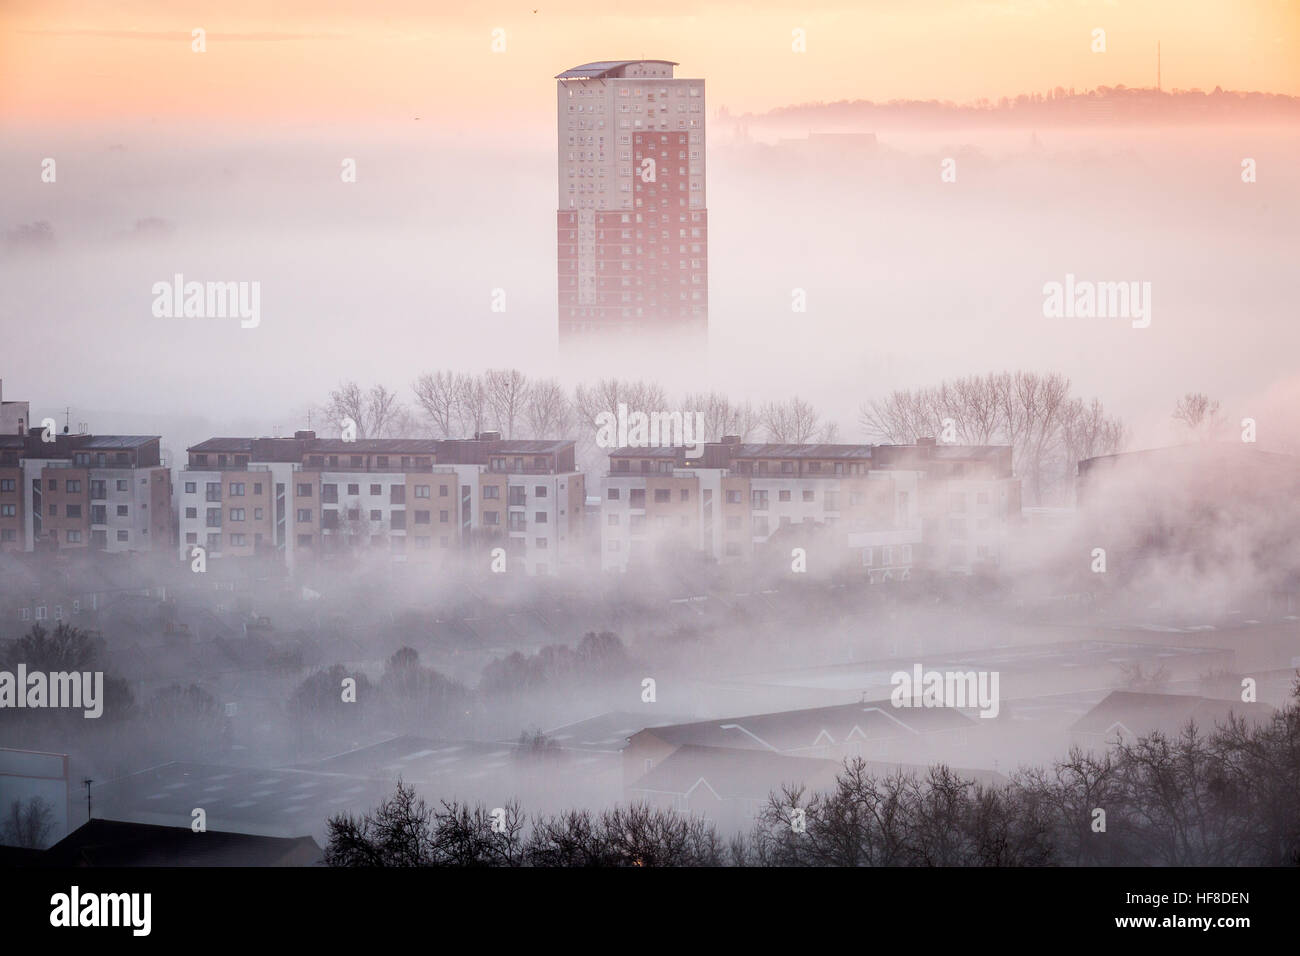 London, UK. 28th December, 2016. UK Weather: Hawke Tower high-rise building seen in the cold heavy fog over SE London © Guy Corbishley/Alamy Live News Stock Photo